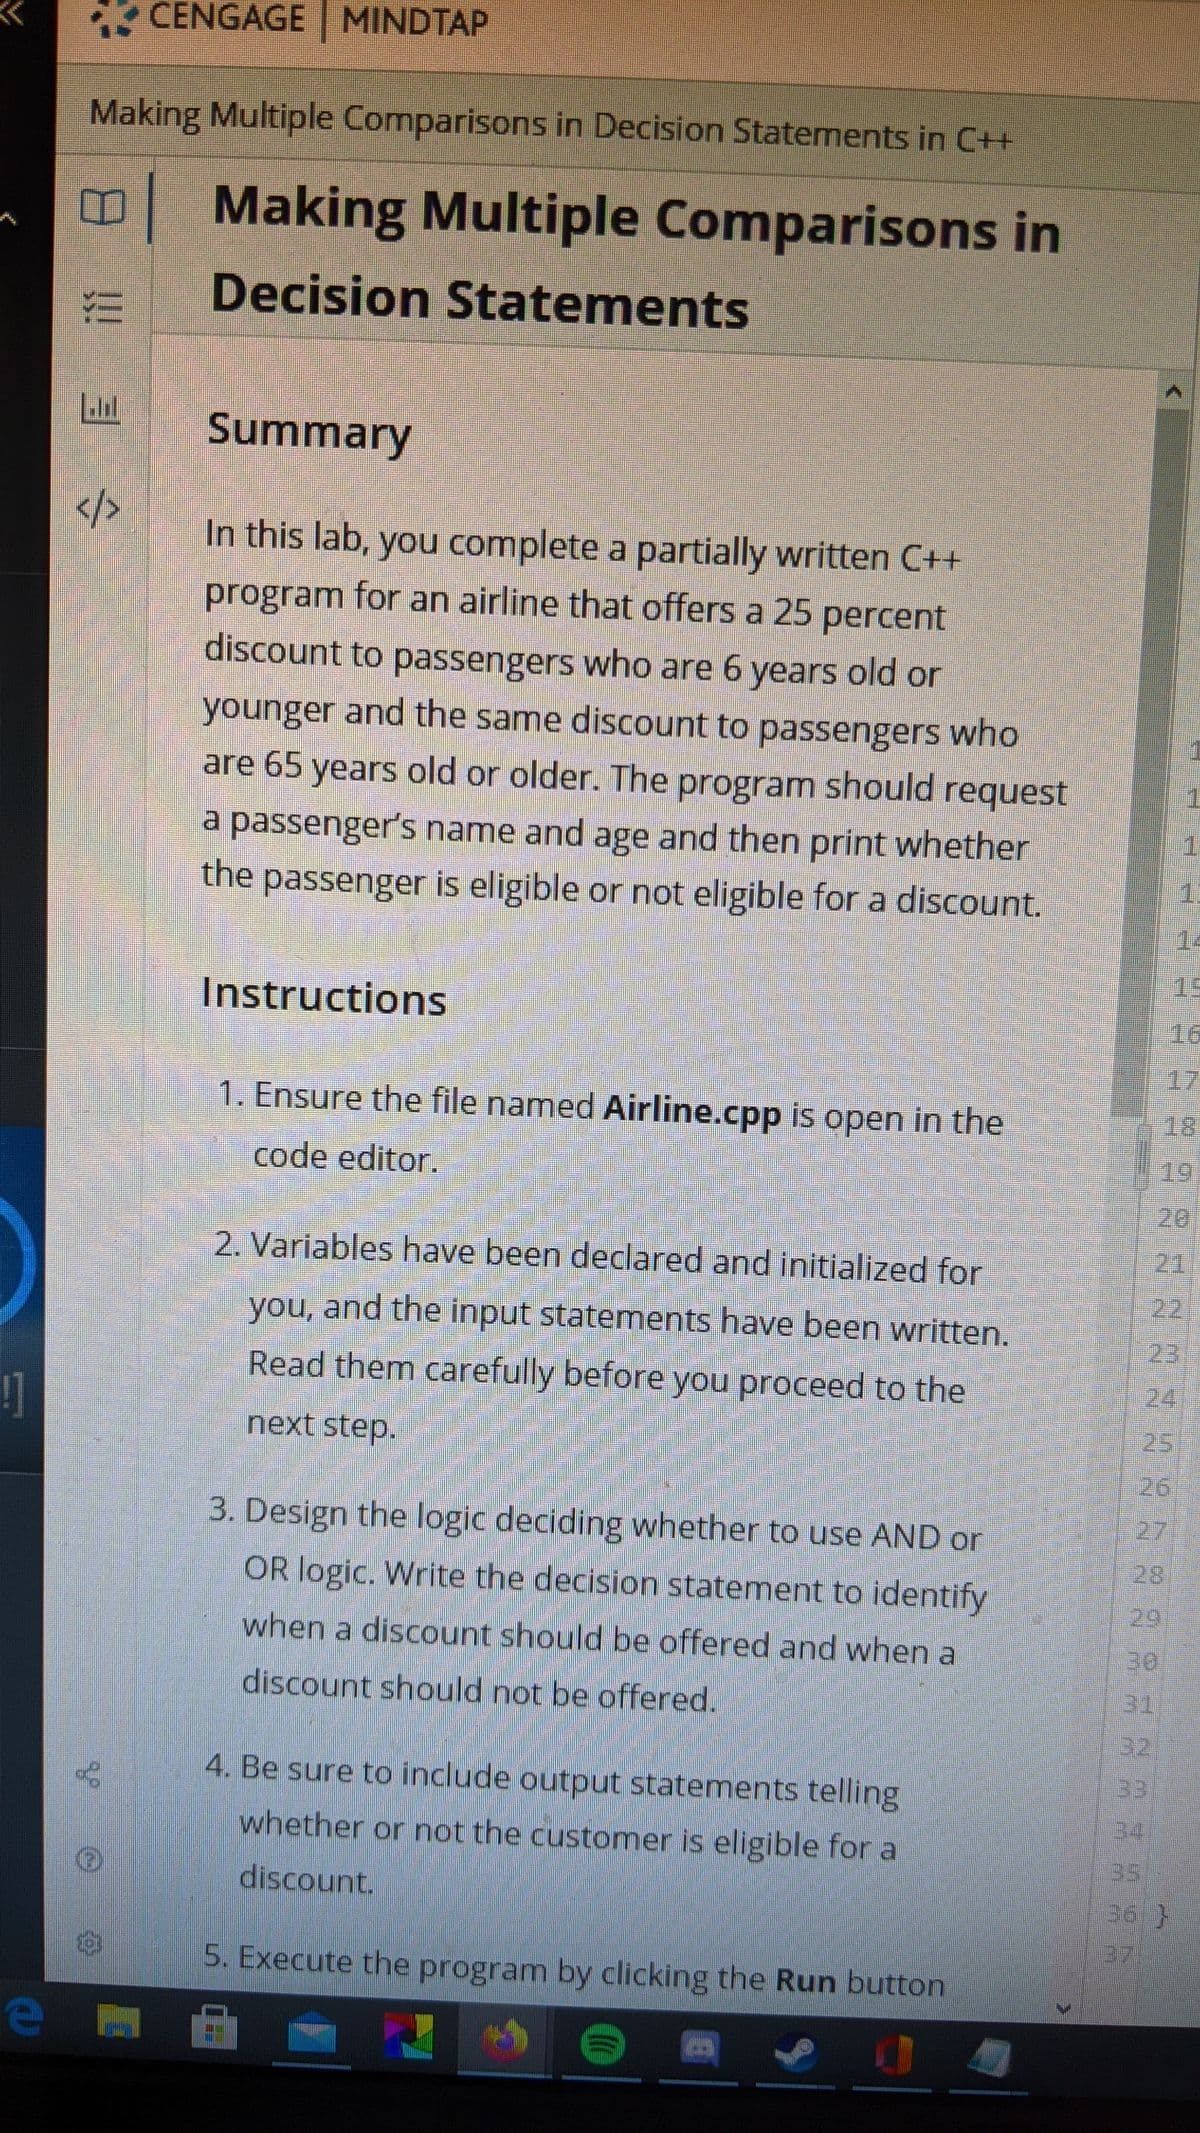 * CENGAGE MINDTAP
Making Multiple Comparisons in Decision Statements in C++
BMaking Multiple Comparisons in
Decision Statements
Summary
</>
In this lab, you complete a partially written C++
program for an airline that offers a 25 percent
discount to passengers who are 6 years old or
younger and the same discount to passengers who
are 65 years old or older. The program should request
1.
a passenger's name and age and then print whether
the passenger is eligible or not eligible for a discount.
1.
14
Instructions
15
16
1. Ensure the file named Airline.cpp is open in the
17
18
code editor.
19
20
2. Variables have been declared and initialized for
211
you, and the input statements have been written.
22
Read them carefully before you proceed to the
23
24
next step.
25
26
3. Design the logic deciding whether to use AND or
27
OR logic. Write the decision statement to identify
28
when a discount should be offered and when a
29
30
discount should not be offered.
31
32
4. Be sure to include output statements telling
33
whether or not the customer is eligible for a
34
discount.
35
36 }
5. Execute the program by clicking the Run button
!!
